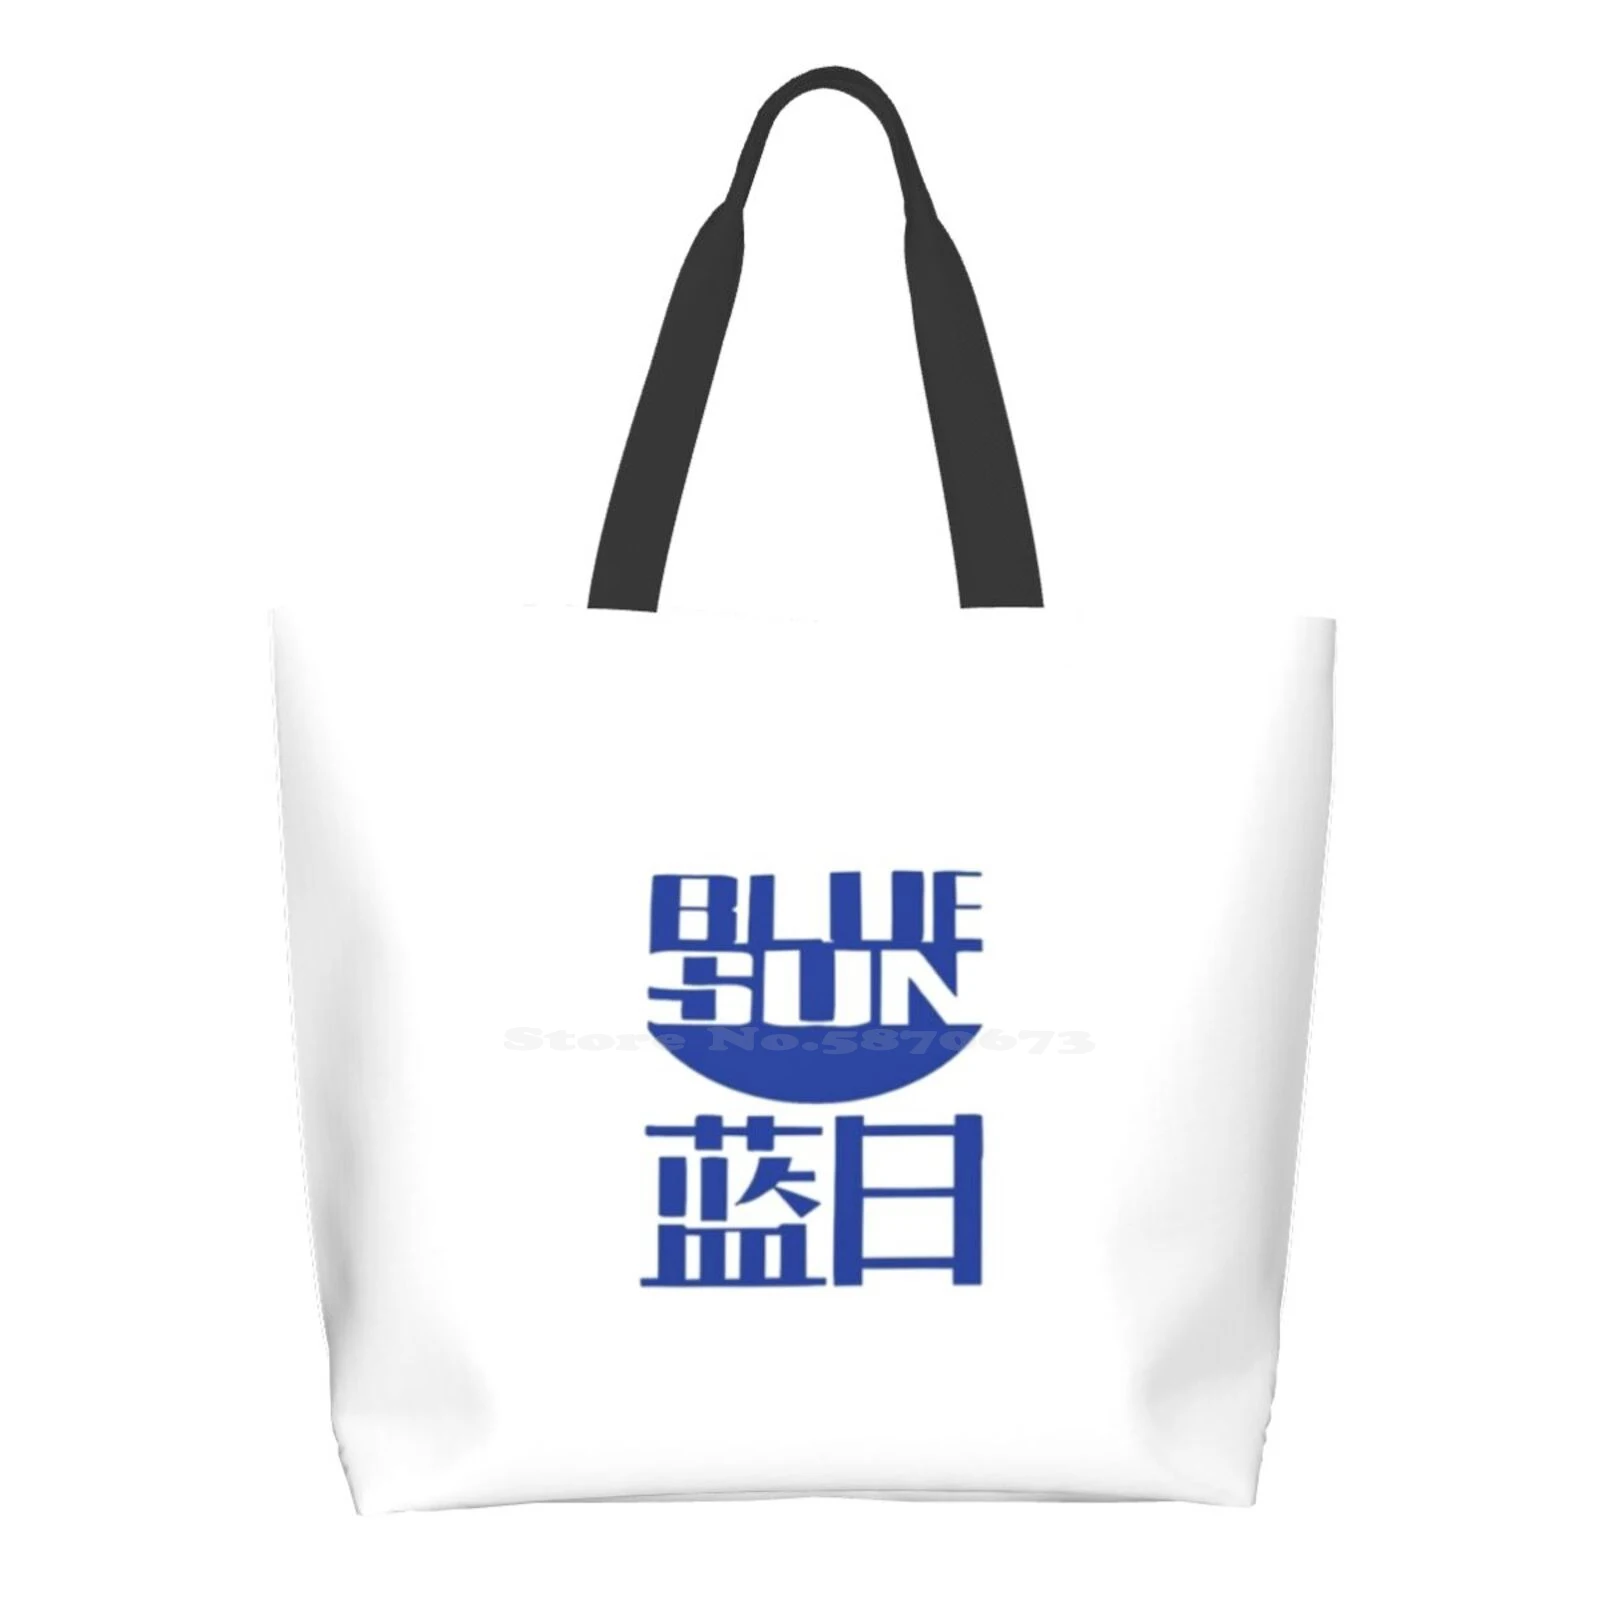 

Black Friday Sale - Blue Sun Vintage Style Serenity Large Size Reusable Foldable Shopping Bag Awesome Be Happy Beach Activist